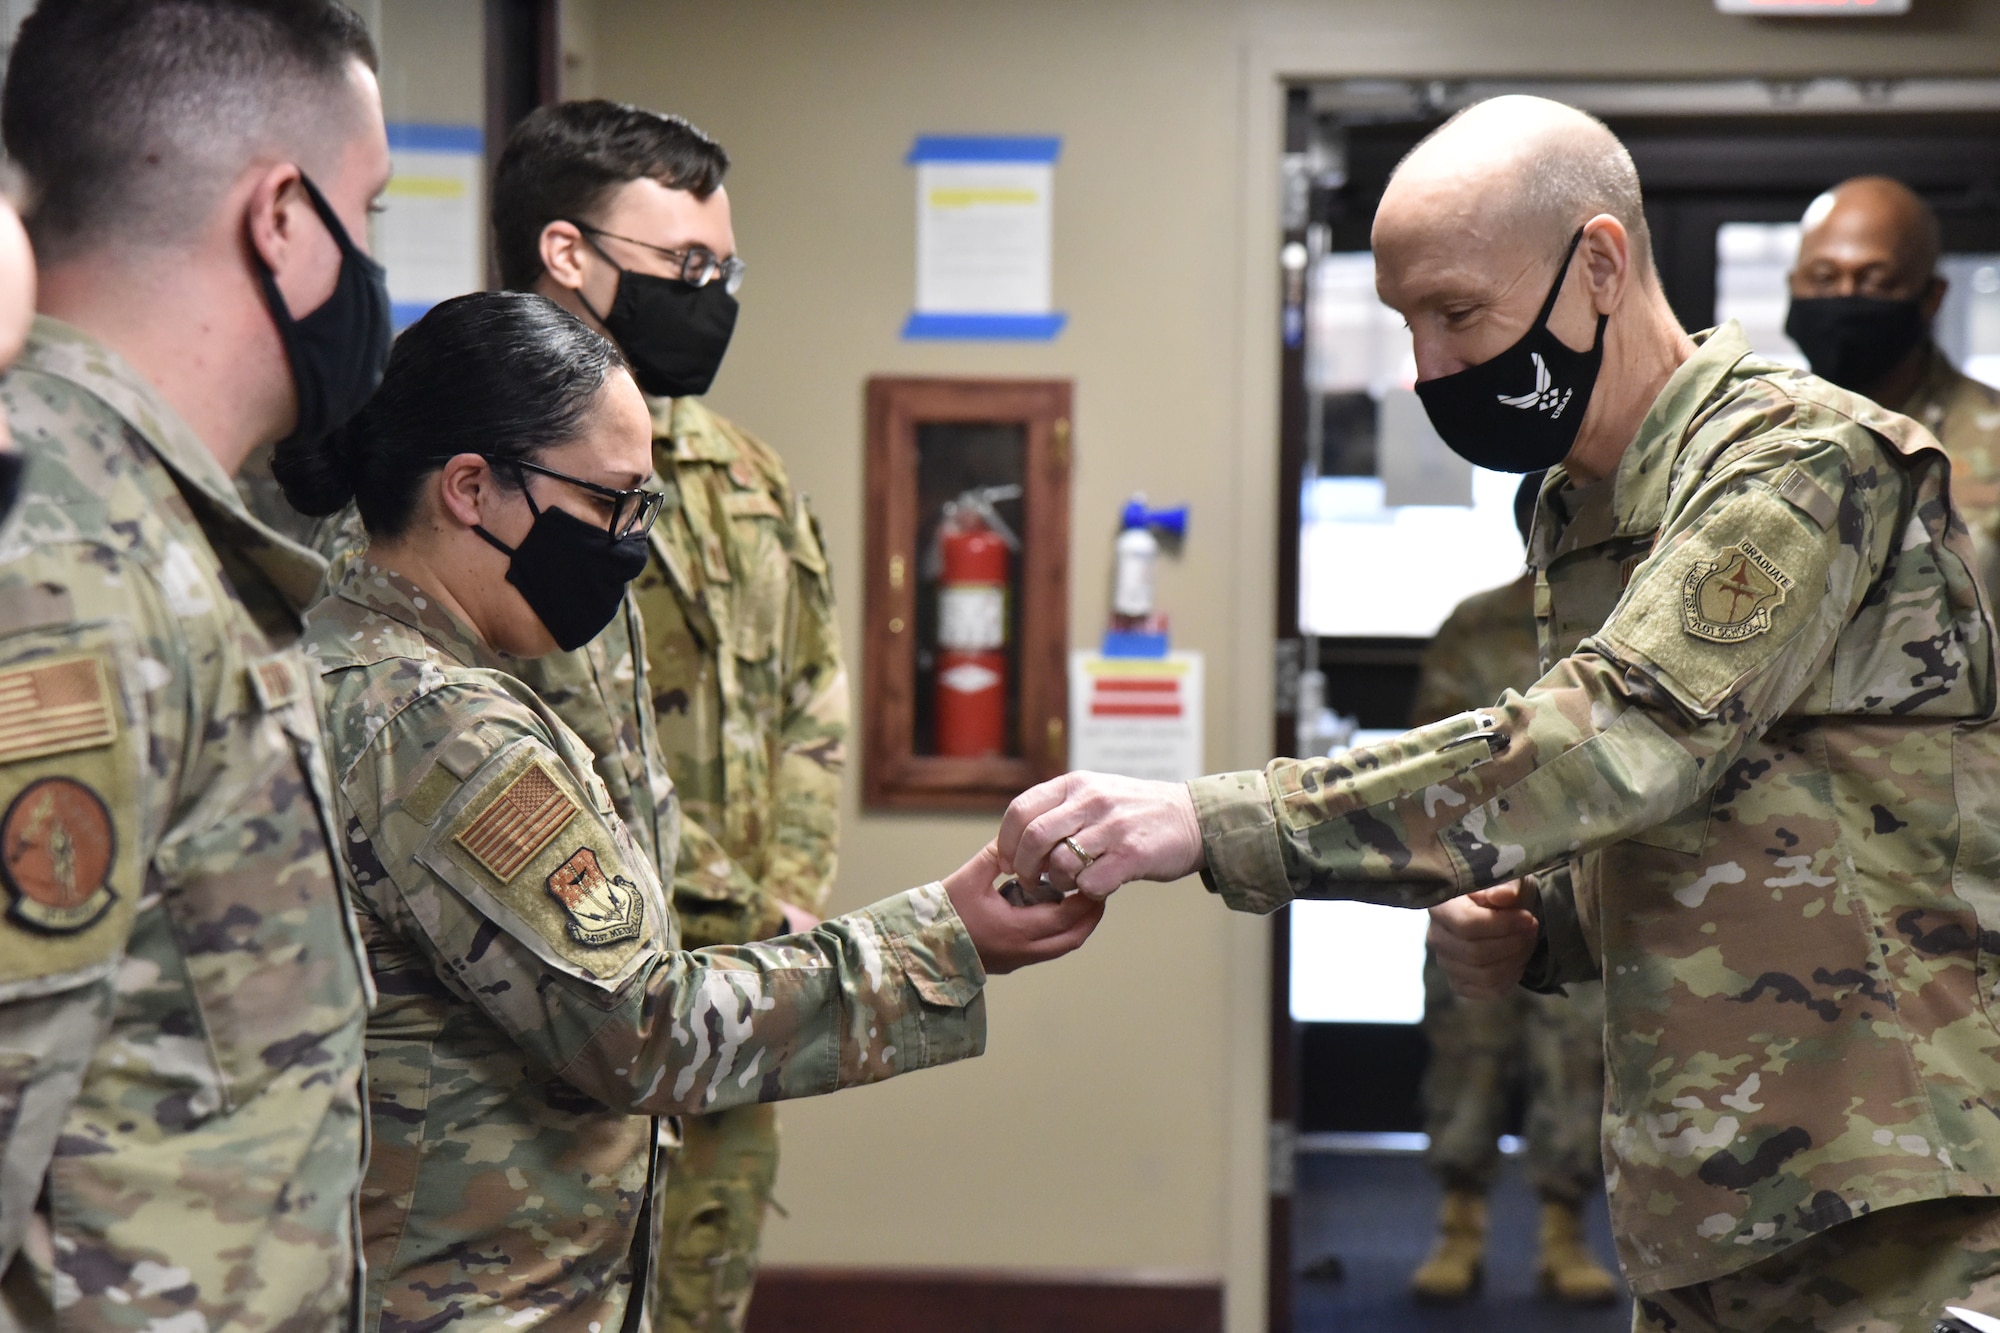 Air Force Vice Chief of Staff Gen. David Allvin presents a coin for exceptional performance to Tech Sgt. Mayra Corona, 341st Medical Group Military Health System Genesis project coordinator, Jan. 29, 2021, during a trip to Malmstrom Air Force Base, Mont. (U.S. Air Force photo by Senior Airman Daniel Brosam)